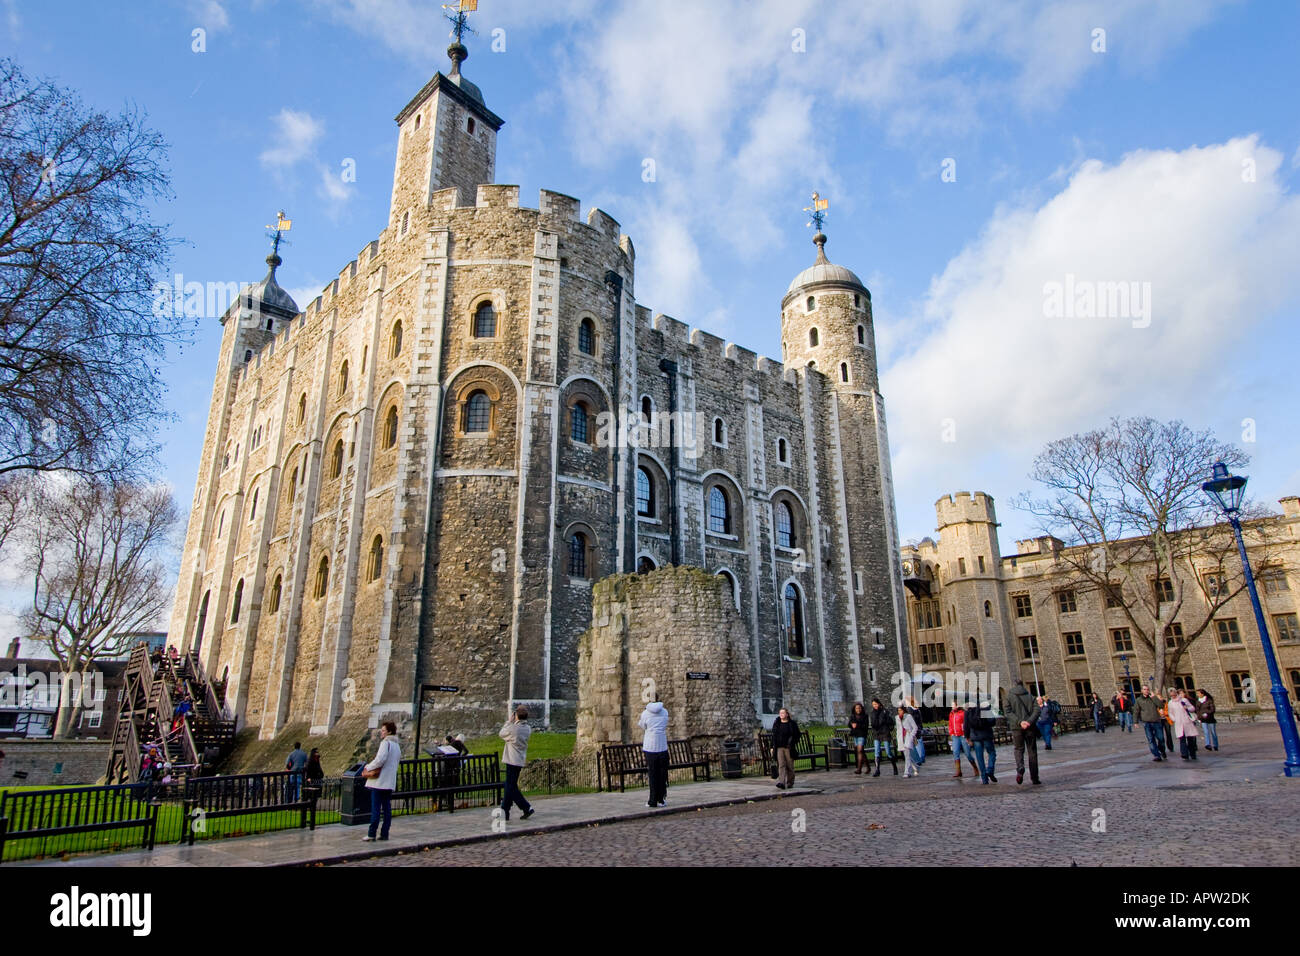 The White Tower at the Tower of London in London UK Stock Photo